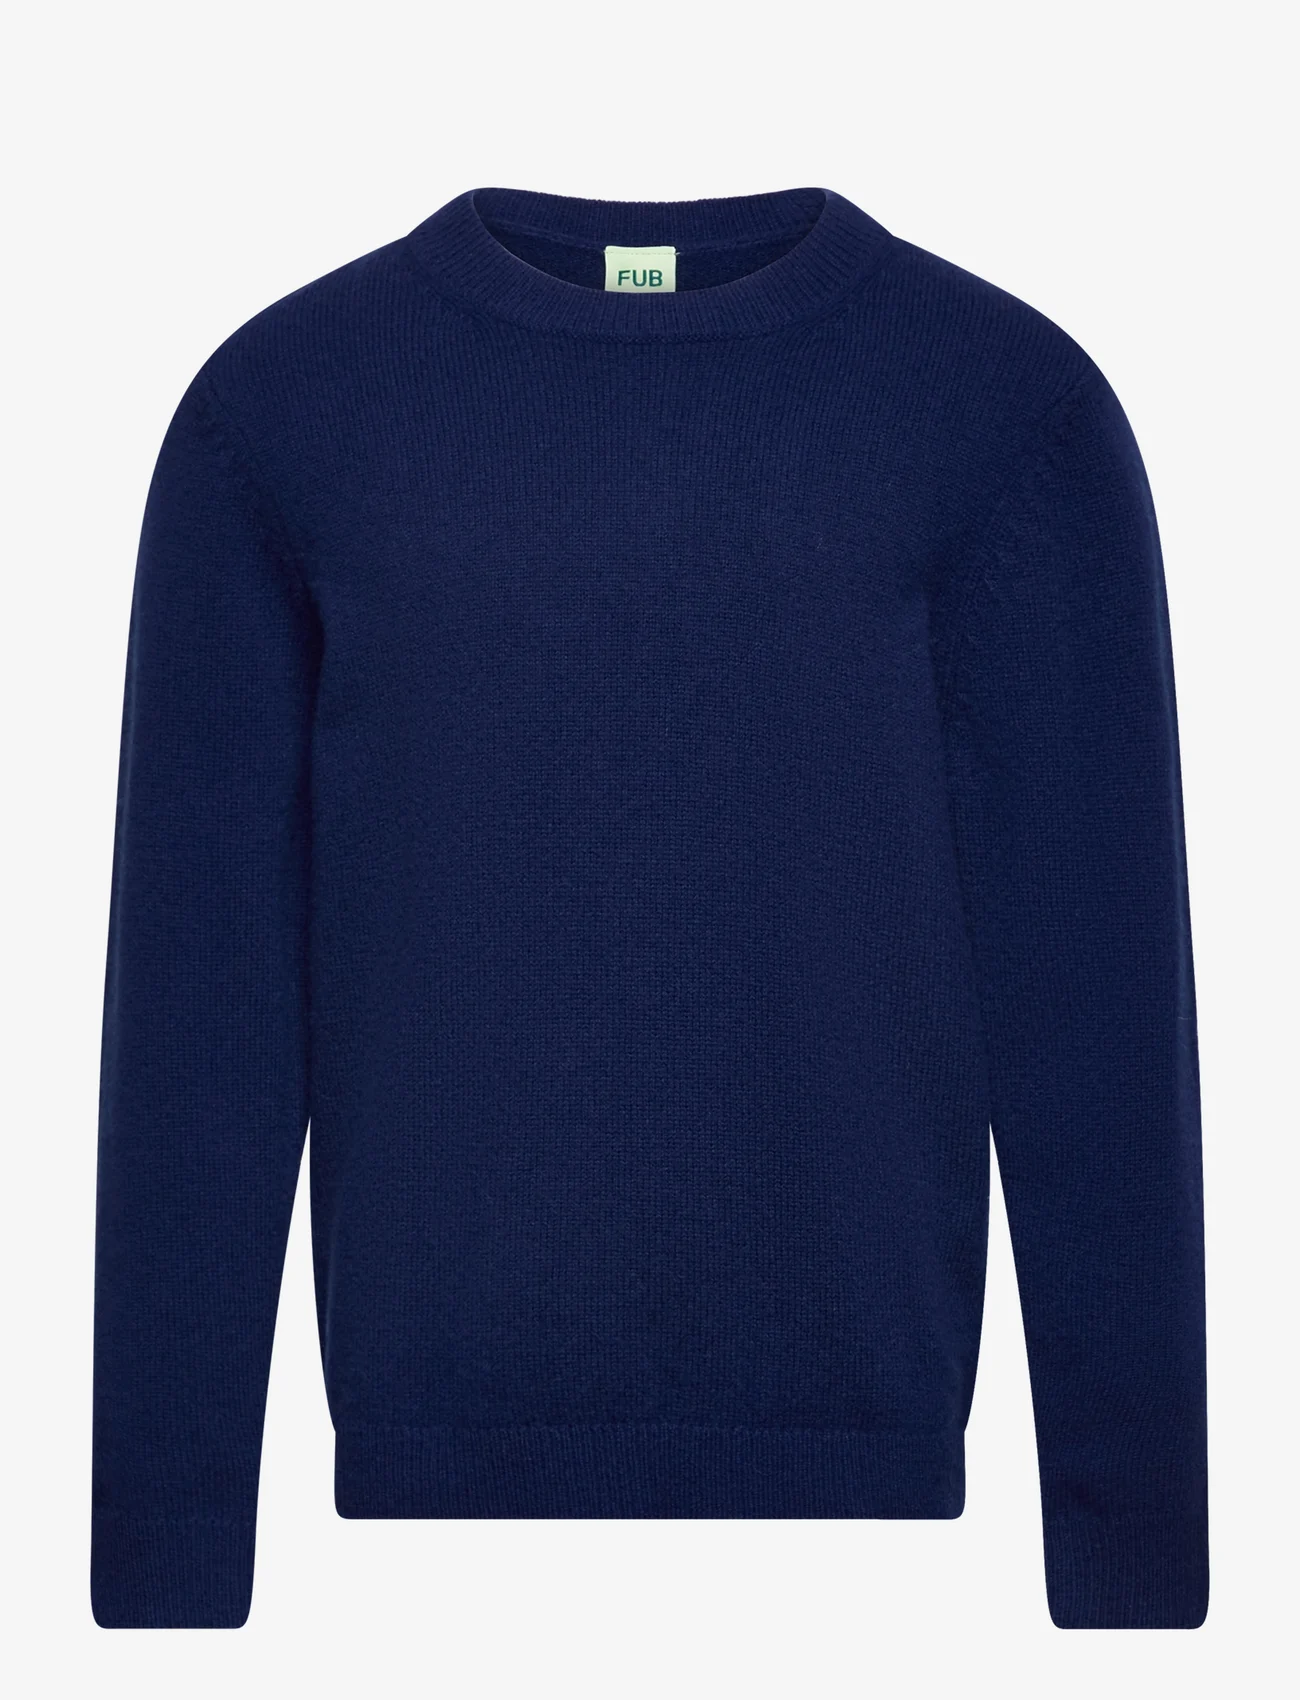 FUB - Lambswool Crew - jumpers - royal blue - 0